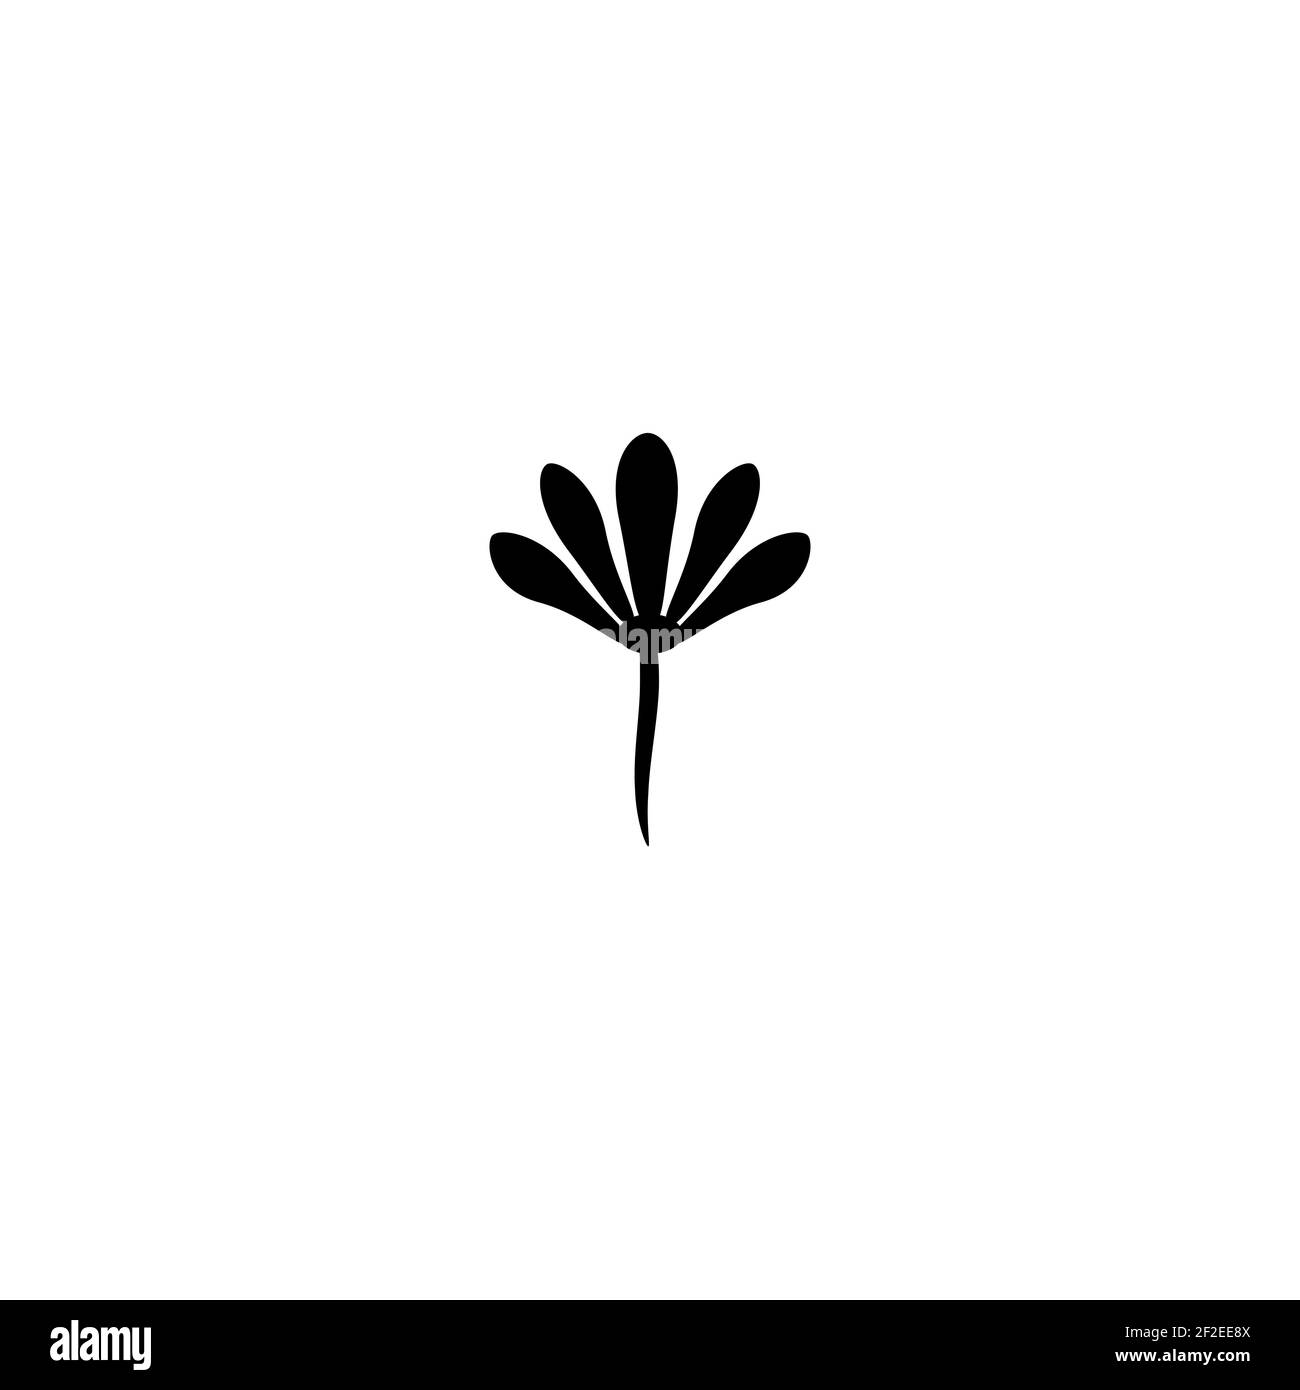 Black flat icon of dandelion flower with curved sprig. Big Bloom with big shabby petals. Isolated on white. Vector illustration. Eco style. Nature sym Stock Vector